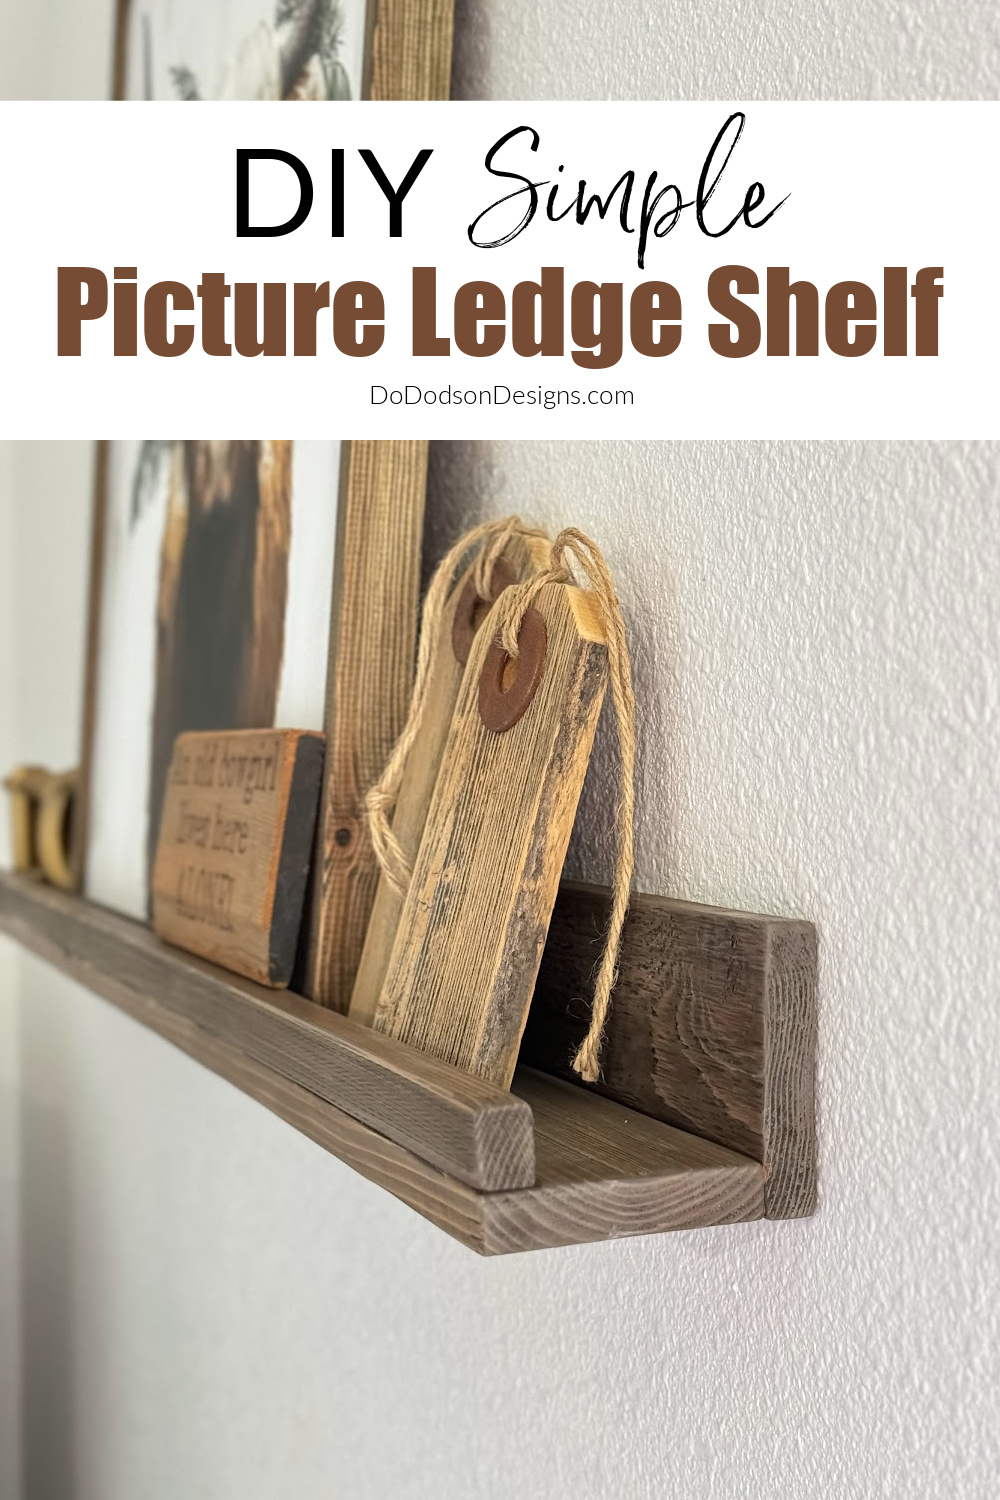 How To Make A DIY Picture Ledge Shelf